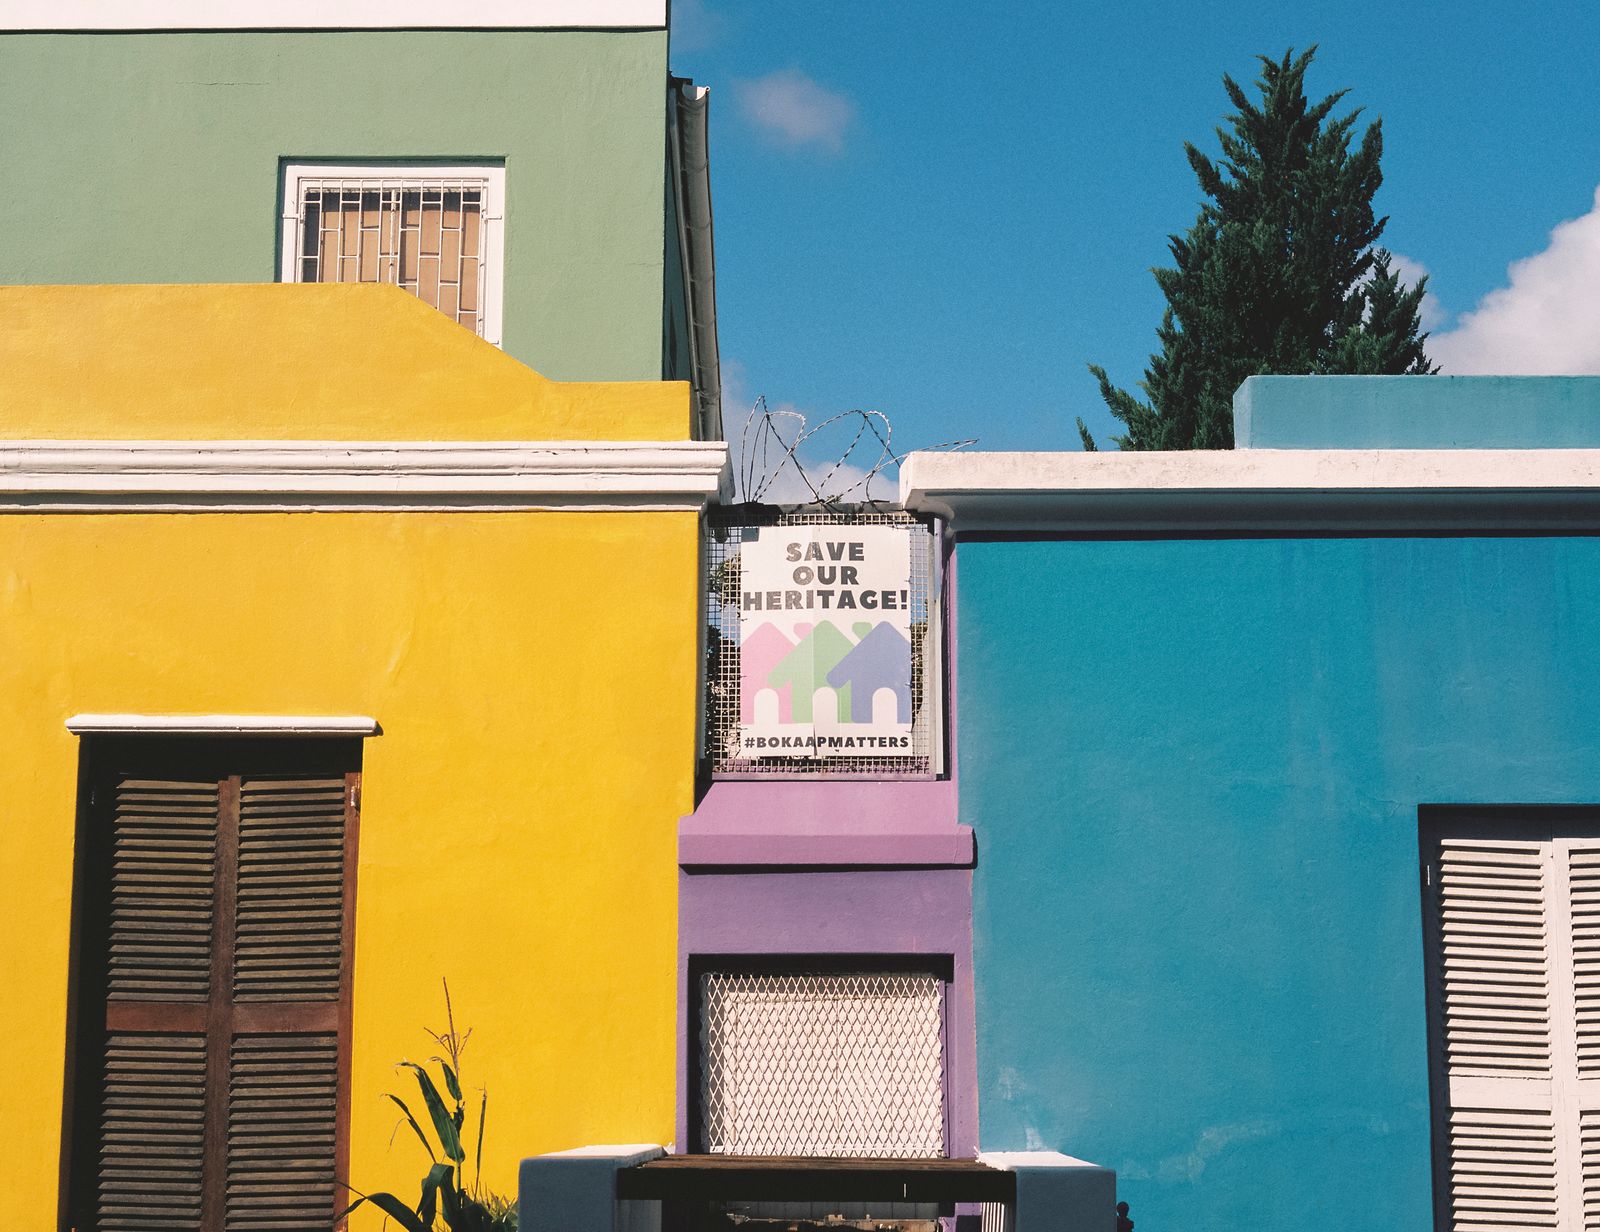 © Ayesha Kazim - Image from the The Bo Kaap Project photography project